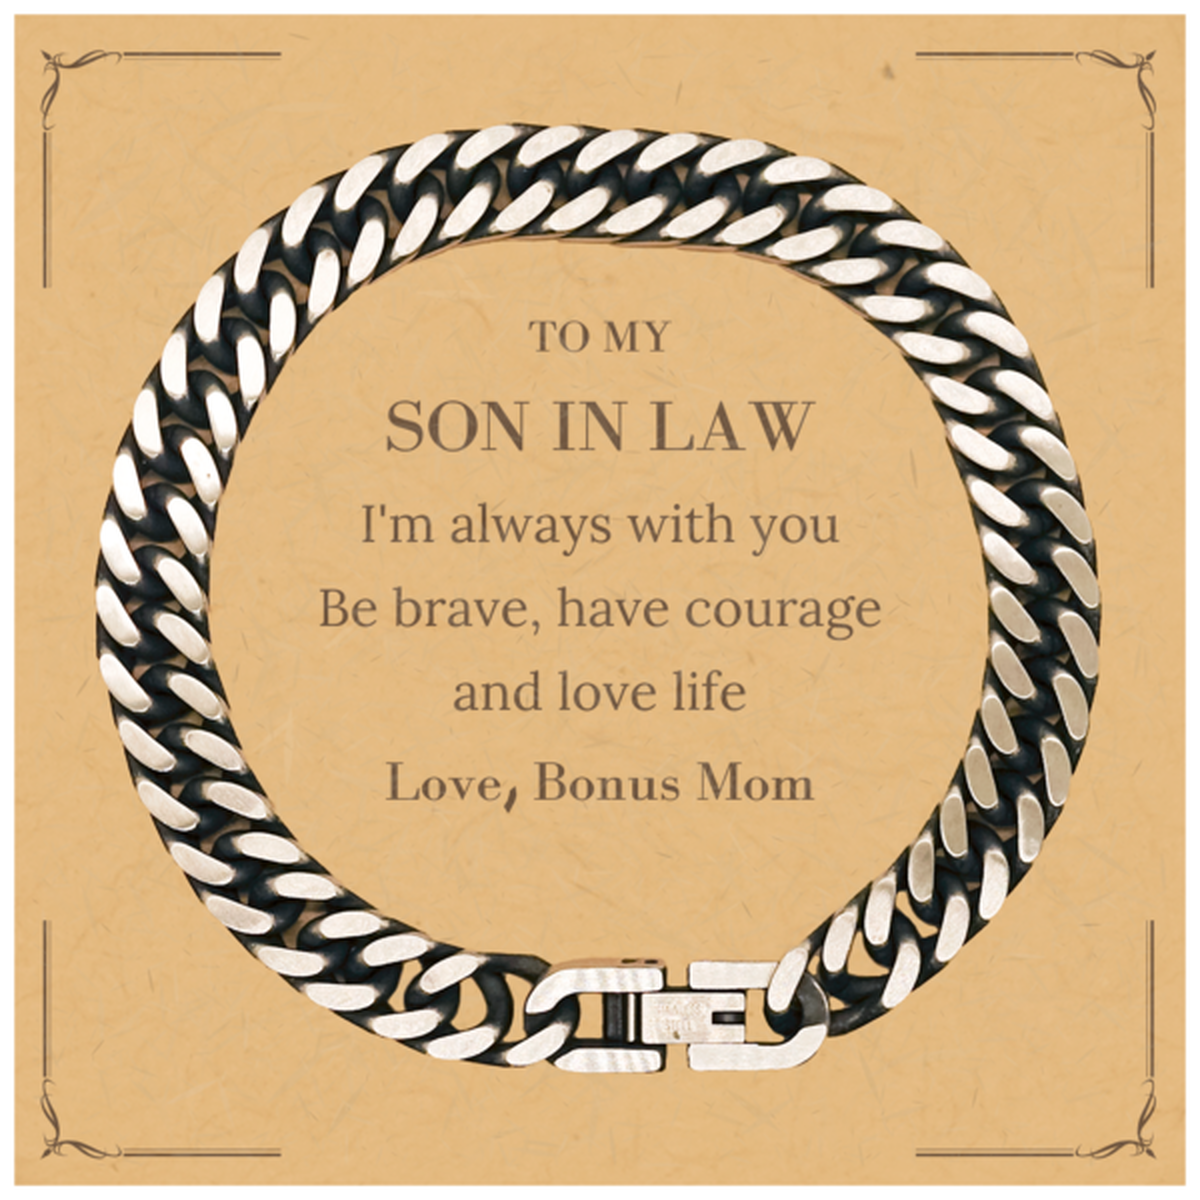 To My Son In Law Gifts from Bonus Mom, Unique Cuban Link Chain Bracelet Inspirational Christmas Birthday Graduation Gifts for Son In Law I'm always with you. Be brave, have courage and love life. Love, Bonus Mom